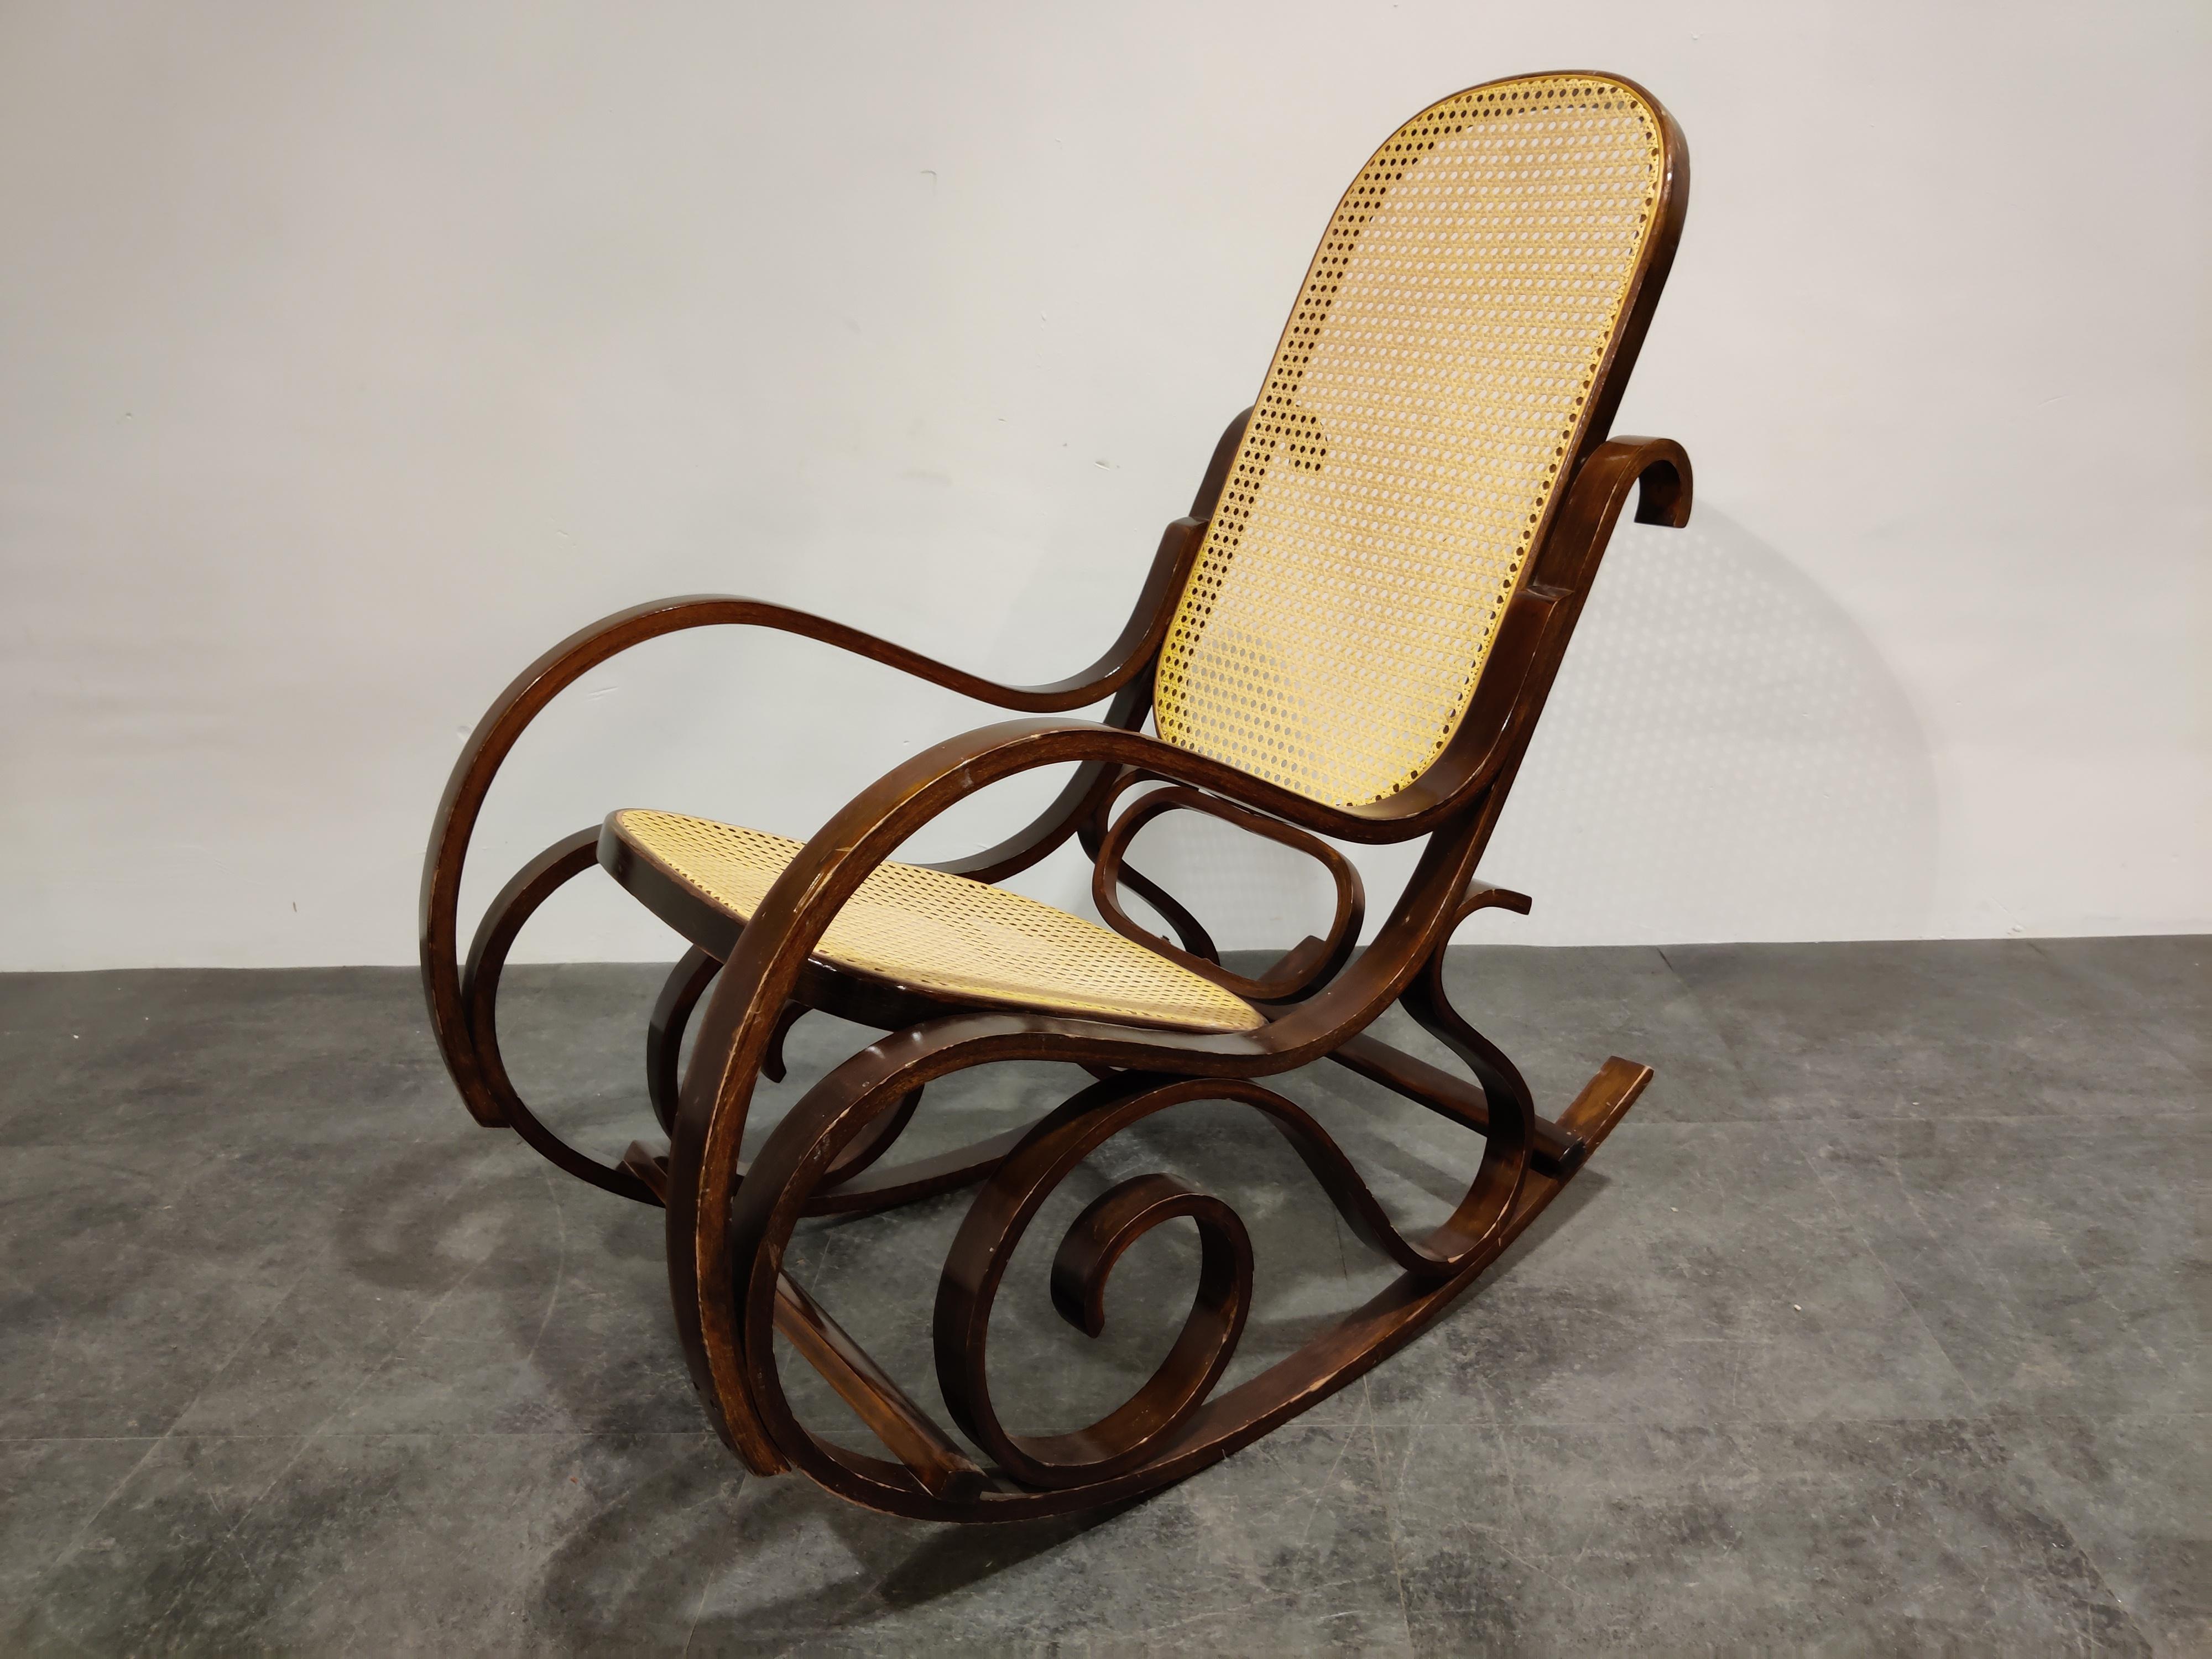 Midcentury dark brown wooden and cane webbing rocking chair.

These Thonet style rocking chair has a very elegant curling shape and look and are ideal to create a contrast in your interior.

Good condition with minor wear.

Cane seats and